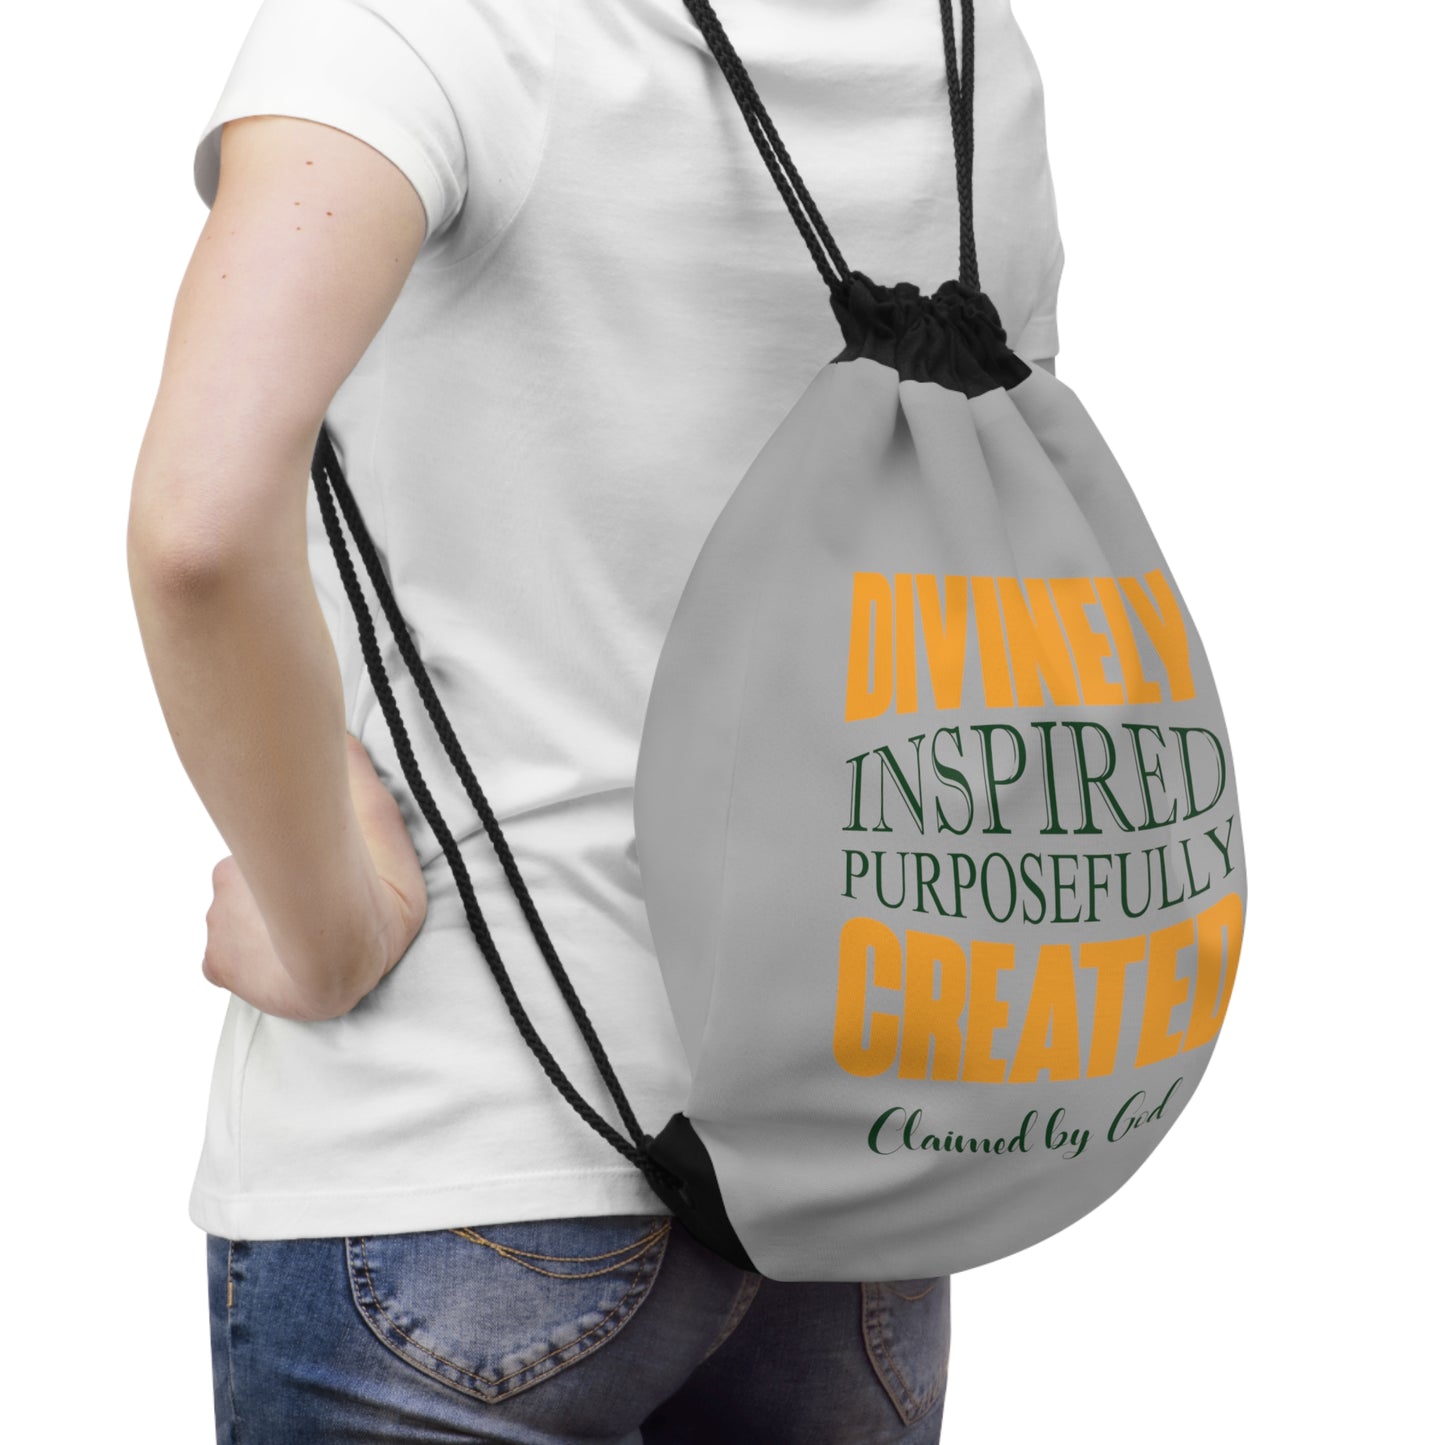 Divinely Inspired Purposefully Created Drawstring Bag